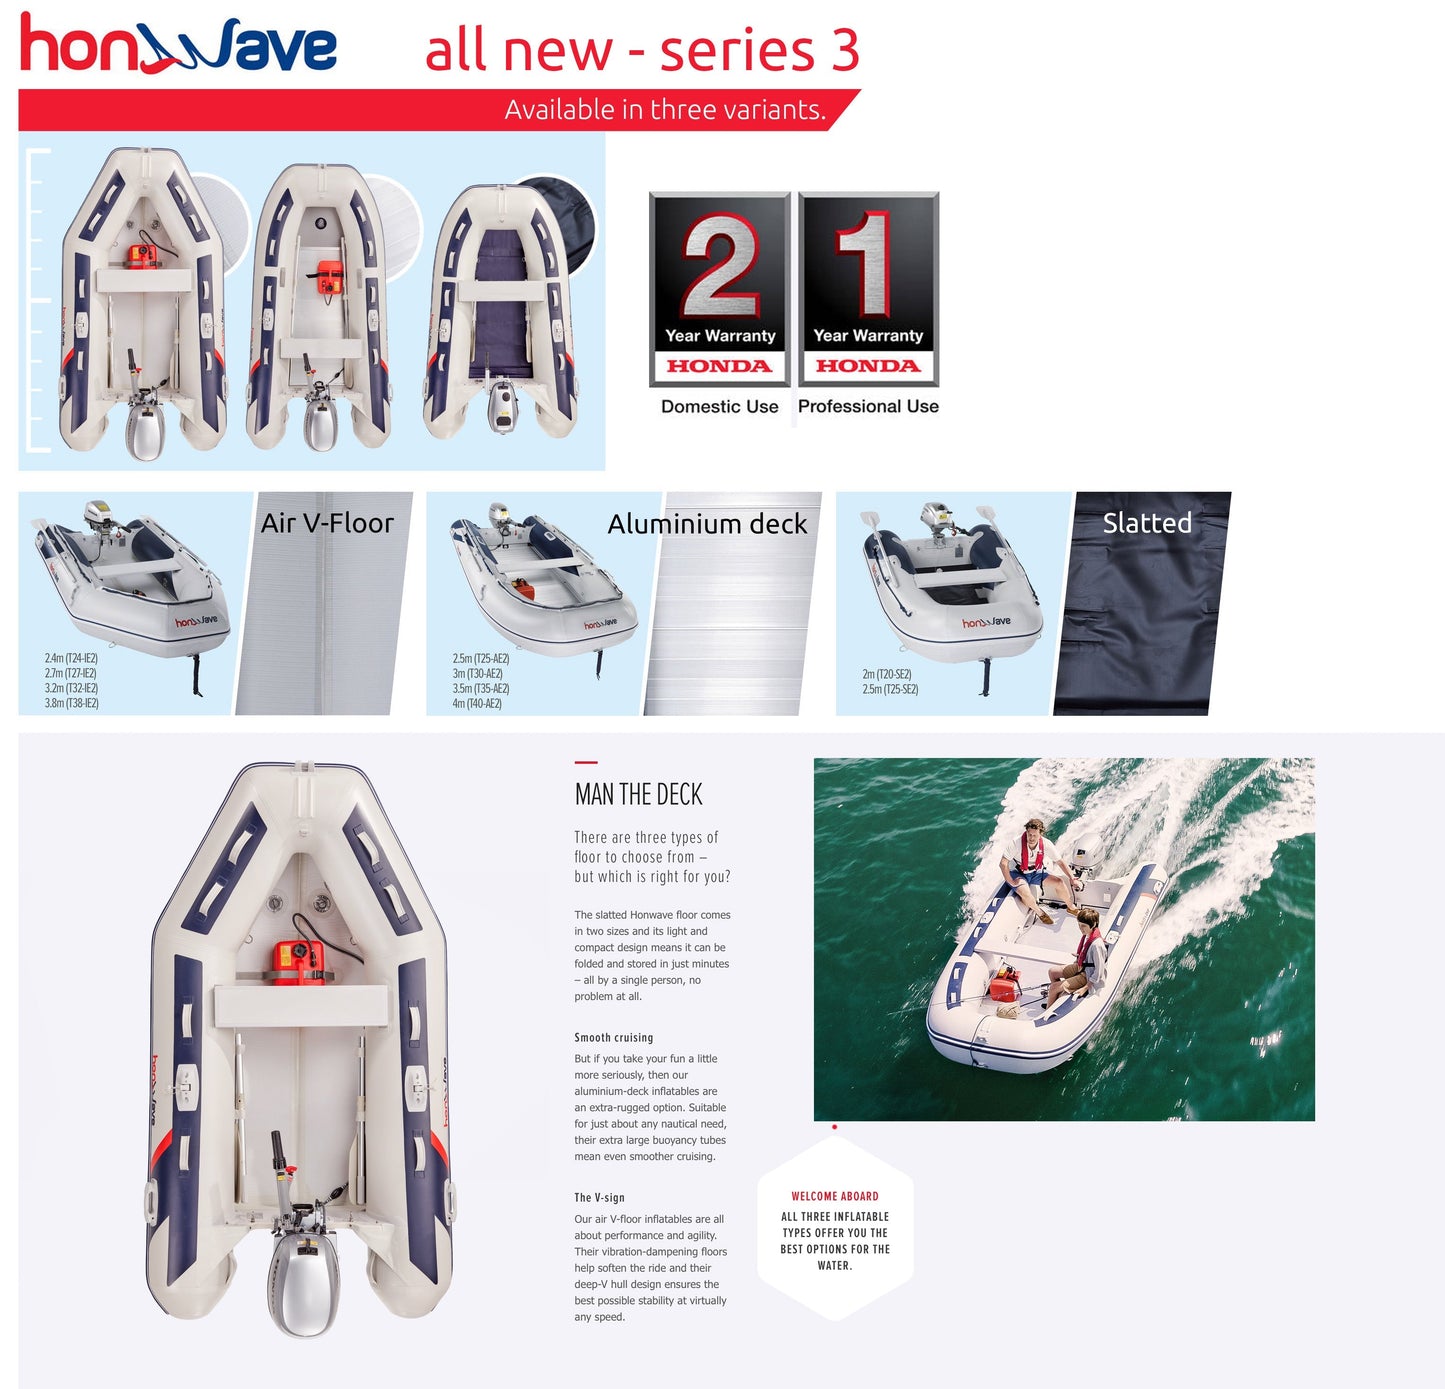 Honwave Package - T32IE3 3.2m Inflatable Boat Dinghy Air V-Floor & Honda Bf4 4hp Outboard Engine